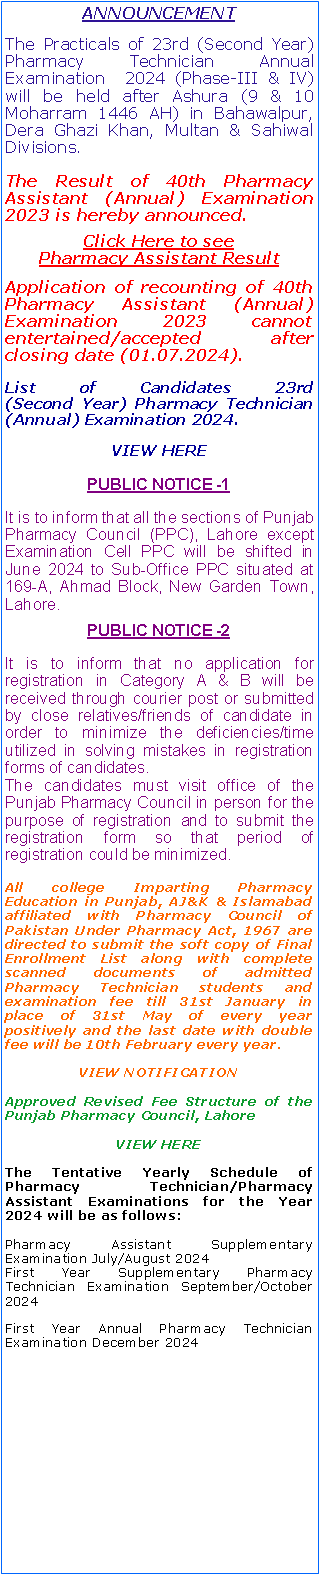 Text Box: ANNOUNCEMENTThe Practicals of 23rd (Second Year) Pharmacy Technician Annual Examination  2024 (Phase-III & IV) will be held after Ashura (9 & 10 Moharram 1446 AH) in Bahawalpur, Dera Ghazi Khan, Multan & Sahiwal Divisions.The Result of 40th Pharmacy Assistant (Annual) Examination 2023 is hereby announced.Click Here to see                Pharmacy Assistant ResultApplication of recounting of 40th Pharmacy Assistant (Annual) Examination 2023 cannot entertained/accepted after closing date (01.07.2024).List of Candidates 23rd                    (Second Year) Pharmacy Technician (Annual) Examination 2024.VIEW HEREPUBLIC NOTICE -1 It is to inform that all the sections of Punjab Pharmacy Council (PPC), Lahore except Examination Cell PPC will be shifted in June 2024 to Sub-Office PPC situated at 169-A, Ahmad Block, New Garden Town, Lahore. PUBLIC NOTICE -2 It is to inform that no application for registration in Category A & B will be received through courier post or submitted by close relatives/friends of candidate in order to minimize the deficiencies/time utilized in solving mistakes in registration forms of candidates.The candidates must visit office of the Punjab Pharmacy Council in person for the purpose of registration and to submit the registration form so that period of registration could be minimized.All college Imparting Pharmacy Education in Punjab, AJ&K & Islamabad affiliated with Pharmacy Council of Pakistan Under Pharmacy Act, 1967 are directed to submit the soft copy of Final Enrollment List along with complete scanned documents of admitted Pharmacy Technician students and examination fee till 31st January in place of 31st May of every year positively and the last date with double fee will be 10th February every year.VIEW NOTIFICATIONApproved Revised Fee Structure of the Punjab Pharmacy Council, LahoreVIEW HEREThe Tentative Yearly Schedule of Pharmacy Technician/Pharmacy Assistant Examinations for the Year 2024 will be as follows:Pharmacy Assistant Supplementary Examination July/August 2024First Year Supplementary Pharmacy Technician Examination September/October 2024First Year Annual Pharmacy Technician Examination December 2024